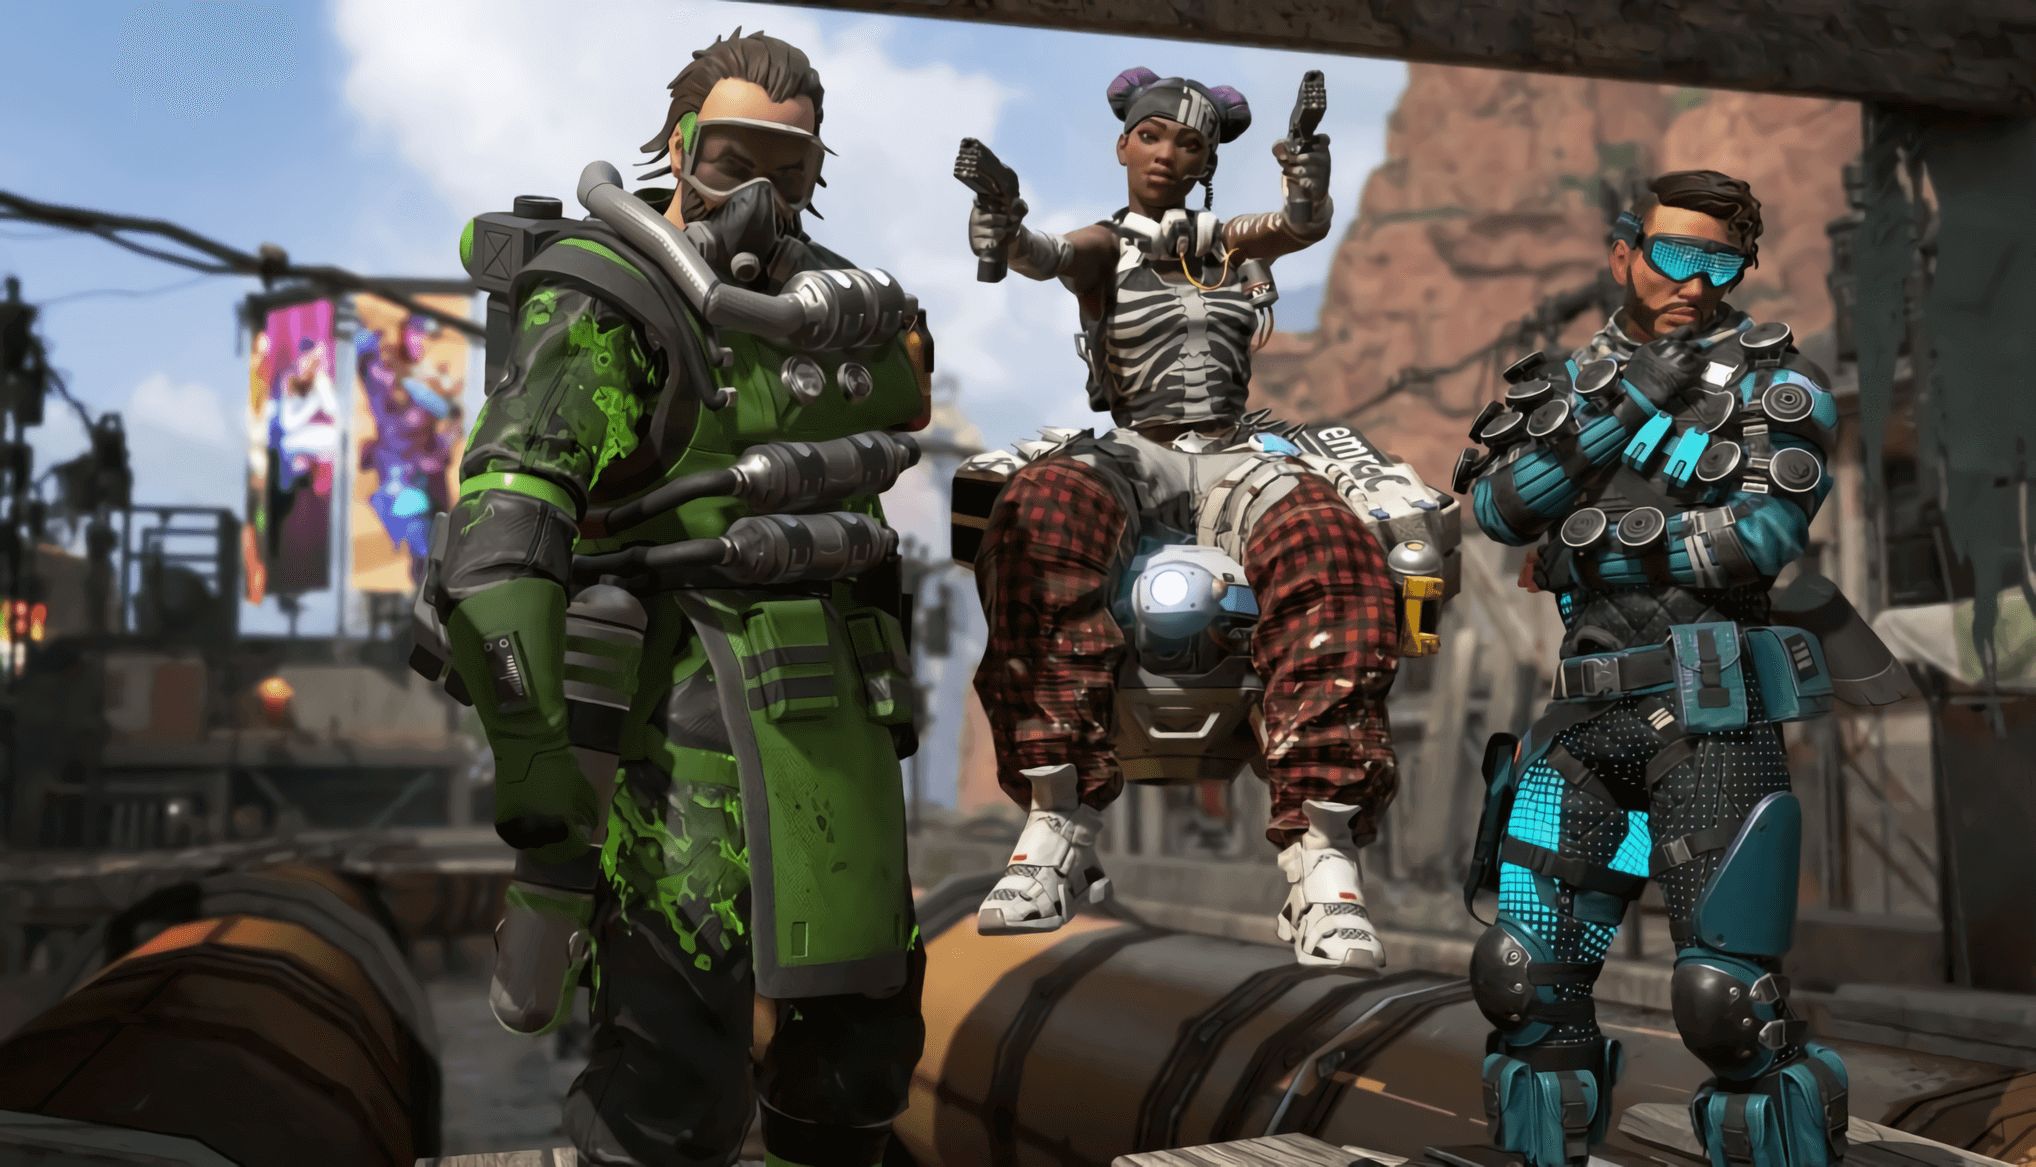 First impressions: Apex Legends adds good twists to the battle royale genre